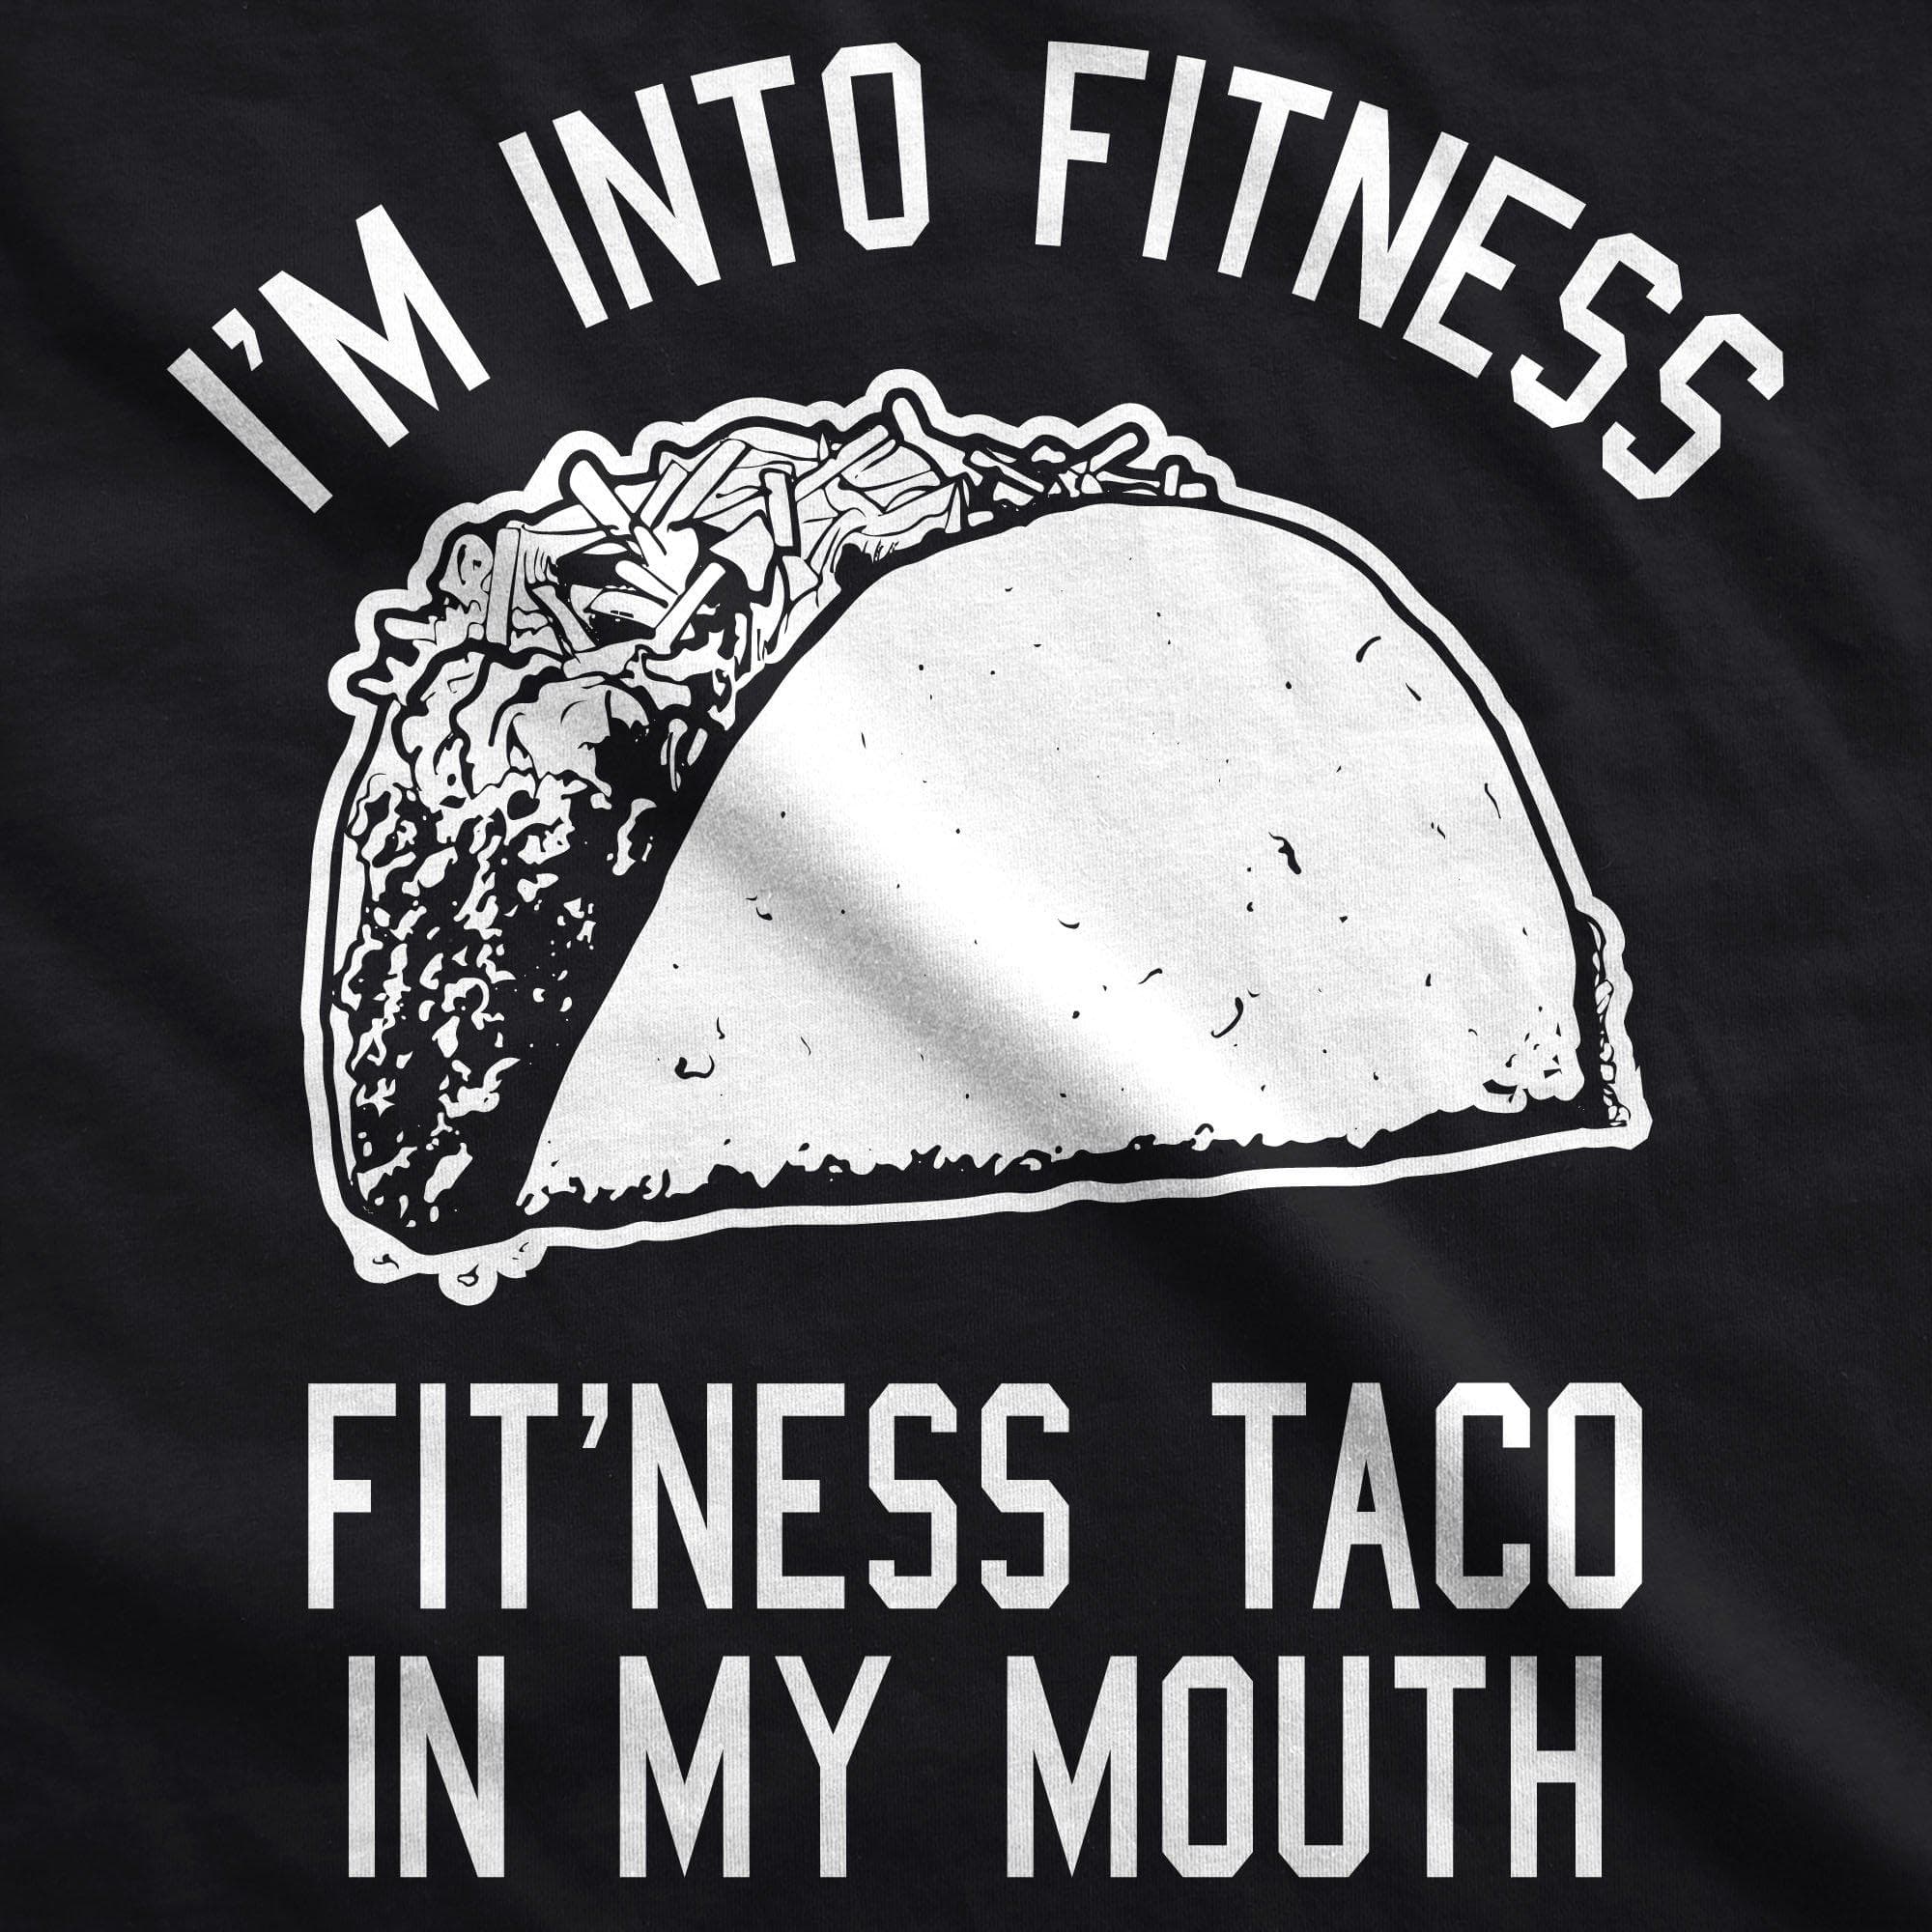 https://cdn.shopify.com/s/files/1/2959/1448/products/crazy-dog-t-shirts-aprons-fitness-taco-cookout-apron-14003354599539_2000x.jpg?v=1624682715